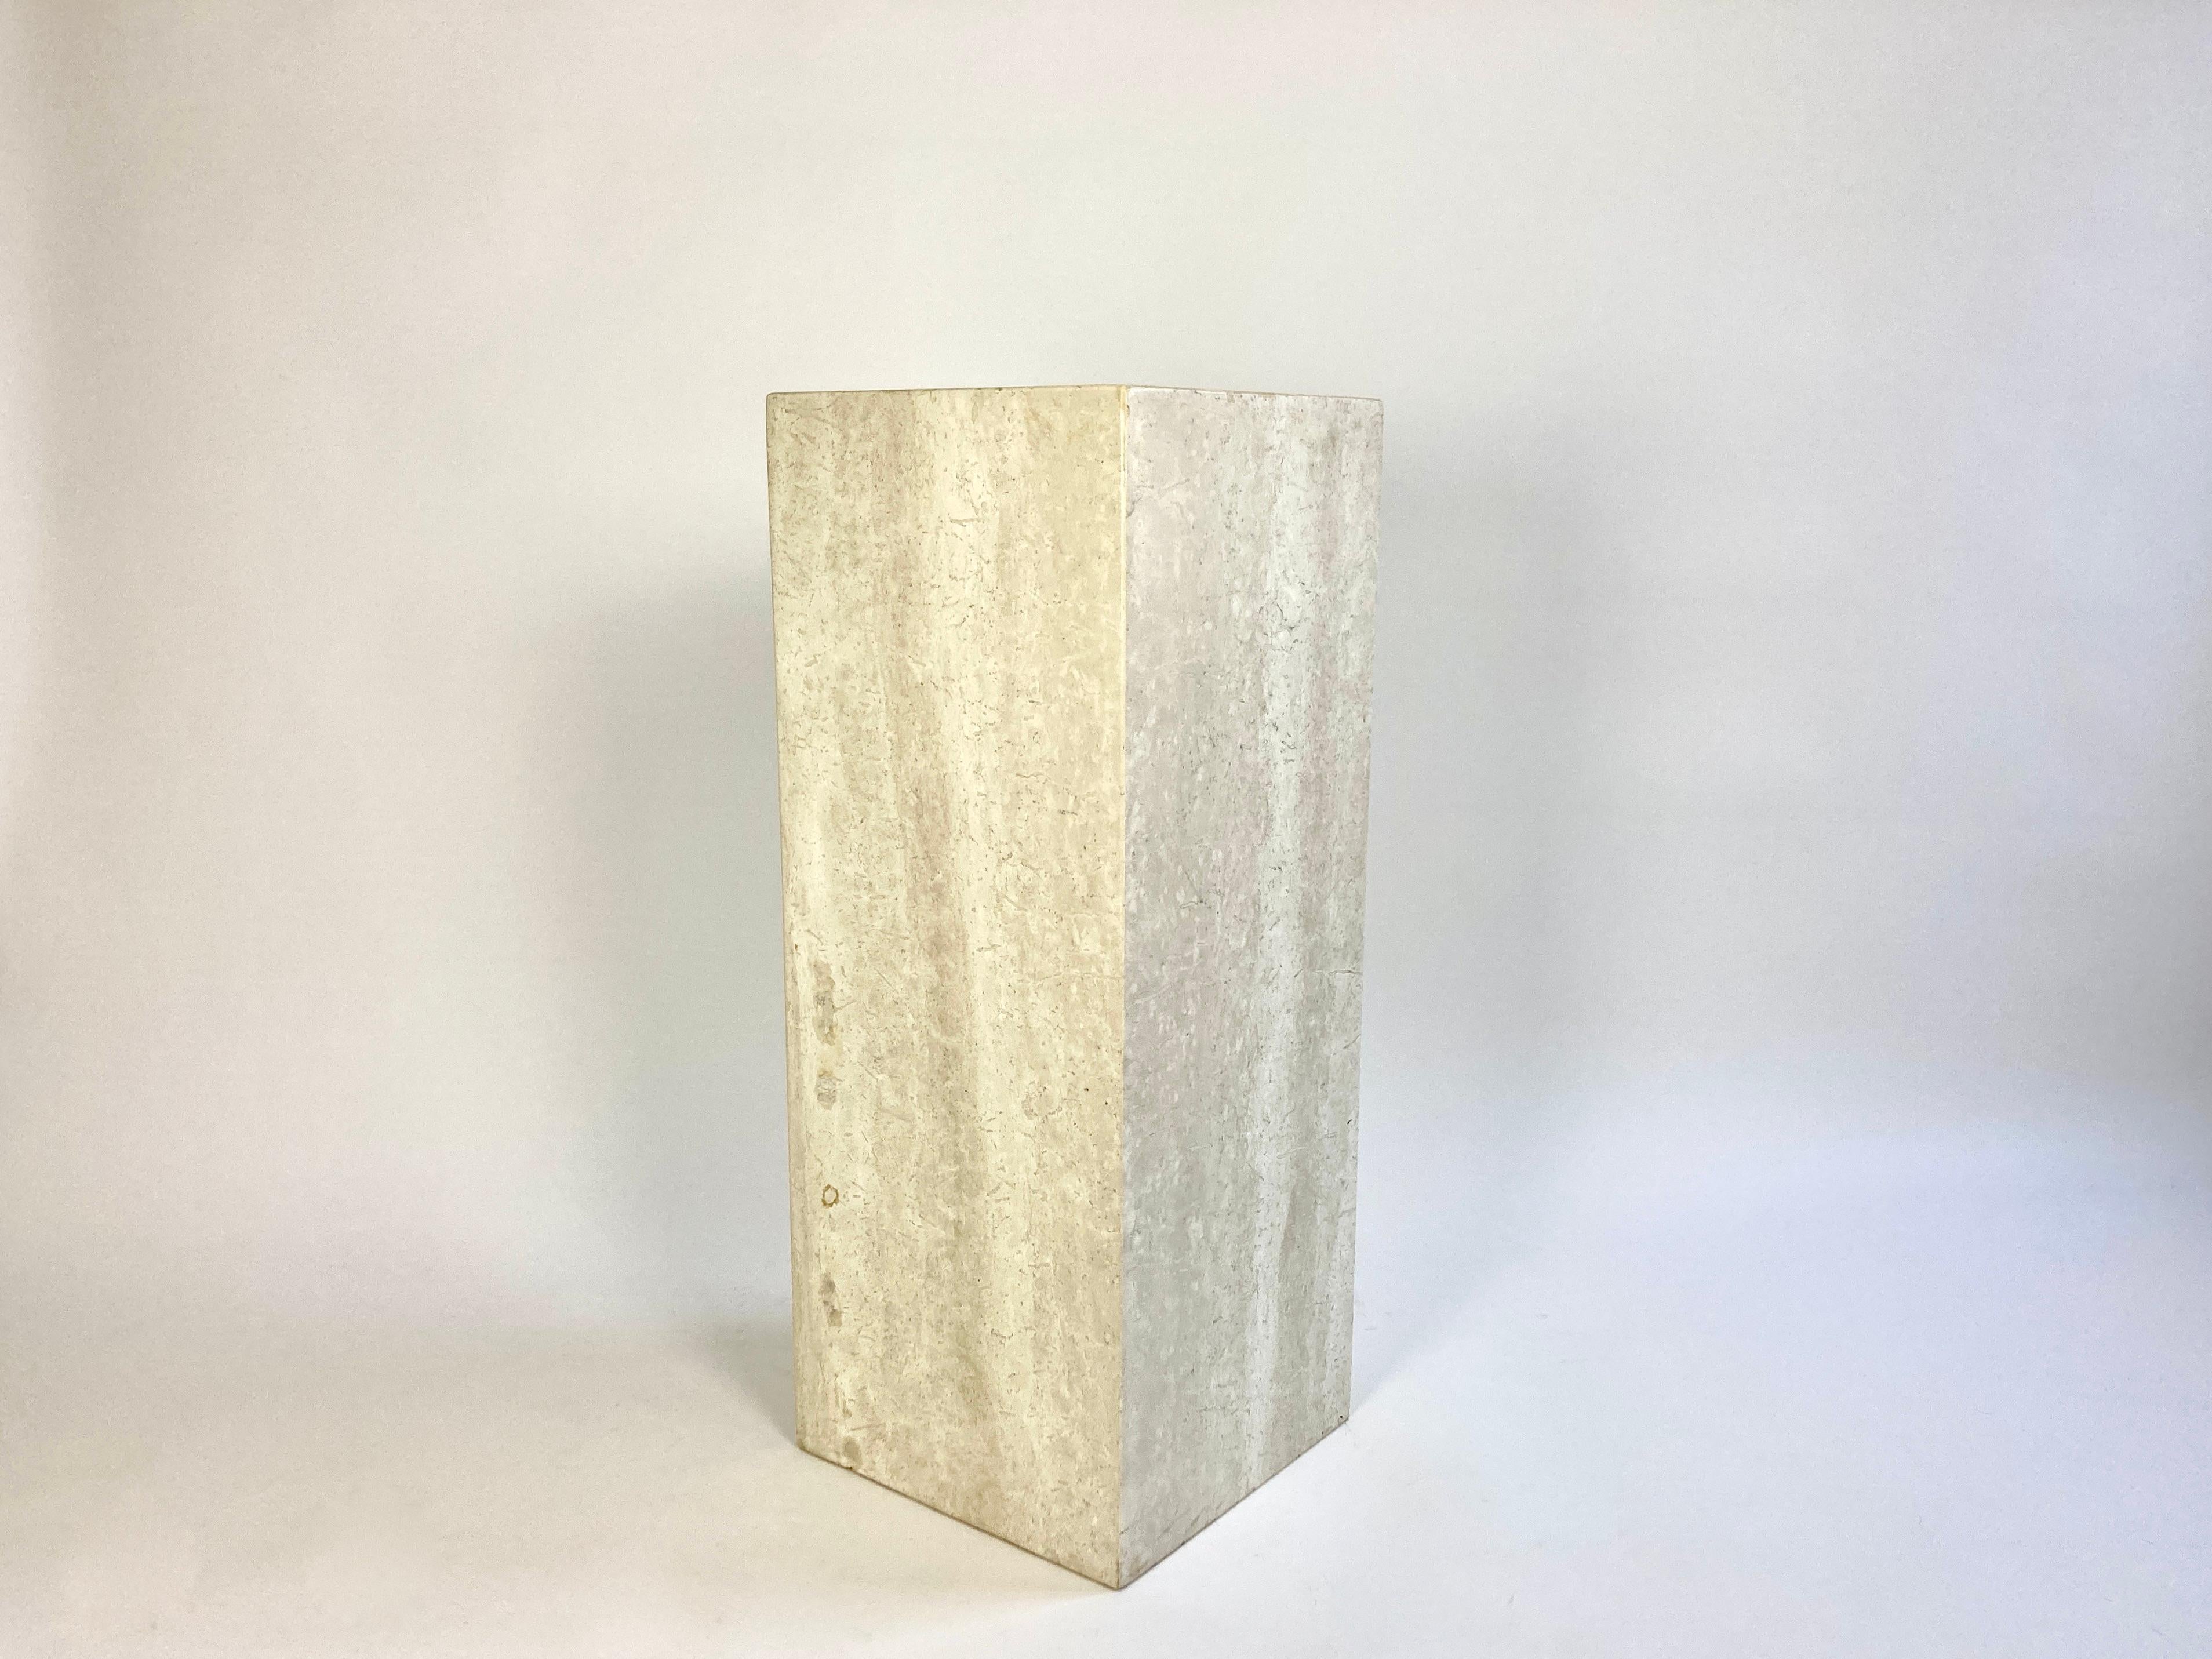 Free standing plinth in semi matt, light tone travertine stone.

Simple geometric design

Excellent condition, no damage, chips, cracks, scratches or stains. Very light signs of use (only noticeable on very close inspection).

Natural imperfections